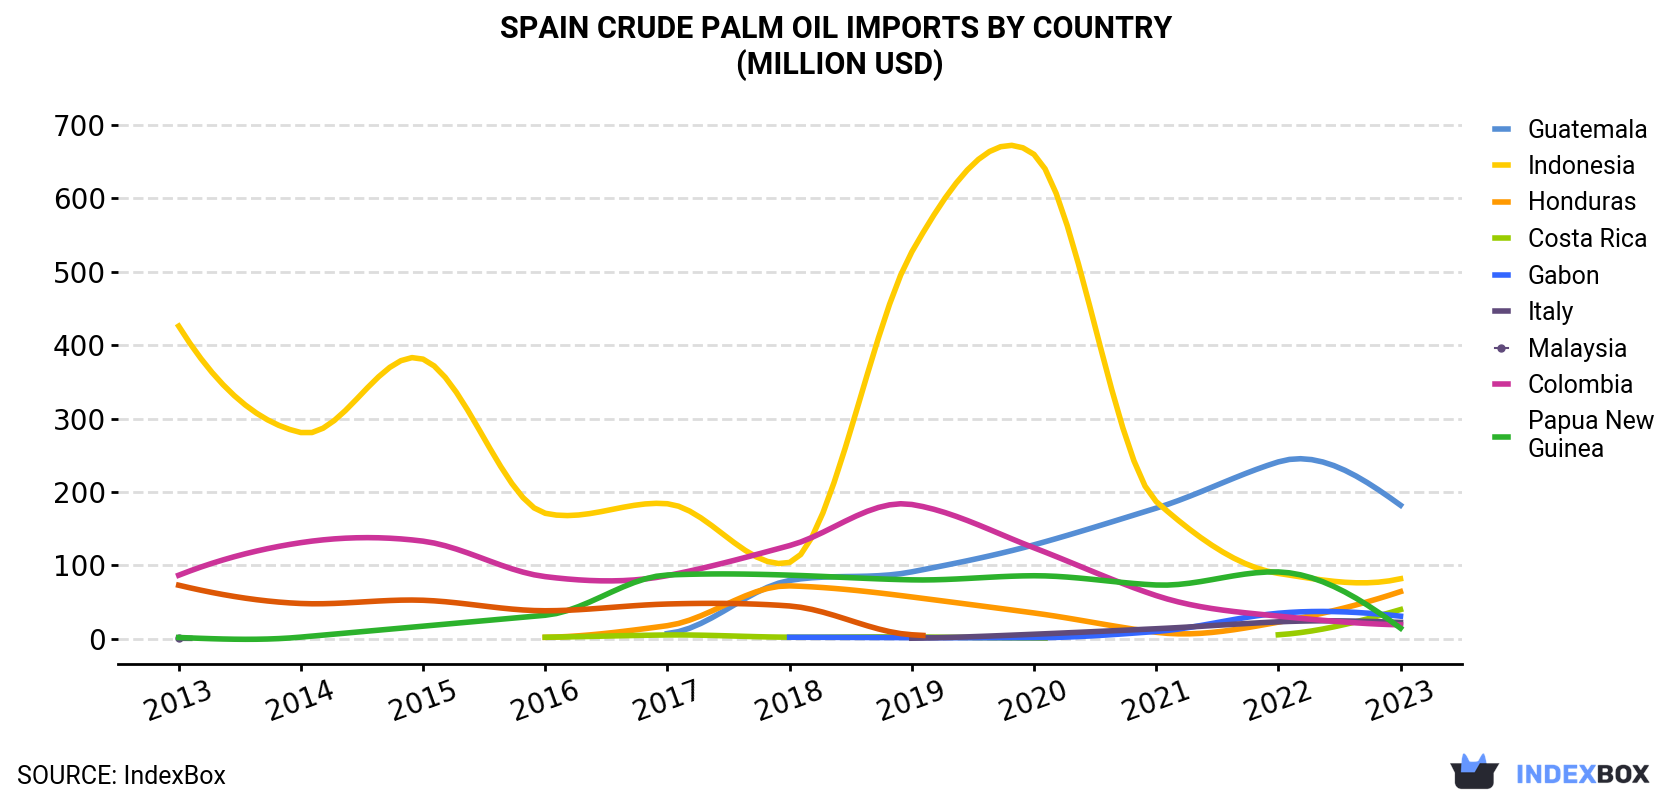 Spain Crude Palm Oil Imports By Country (Million USD)